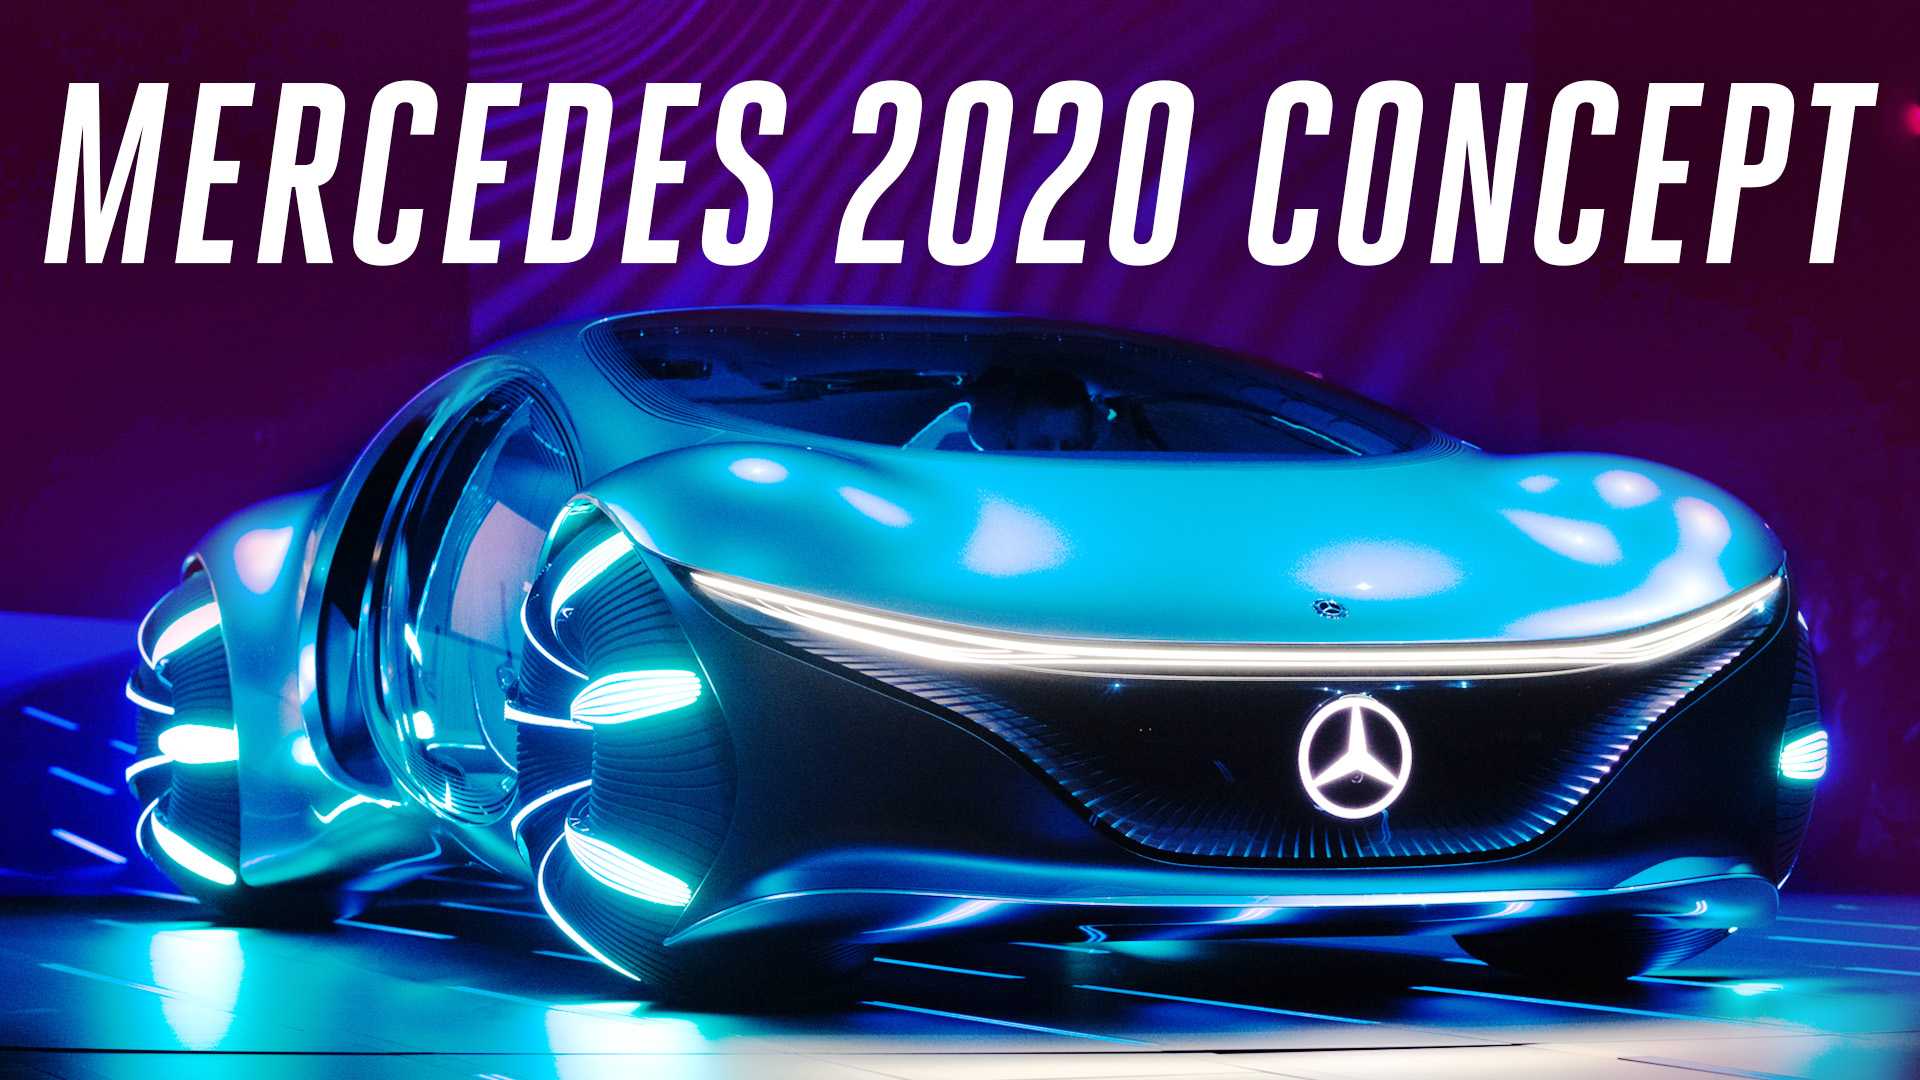 We Drive the MercedesBenz Vision AVTR Concept Car from Avatar